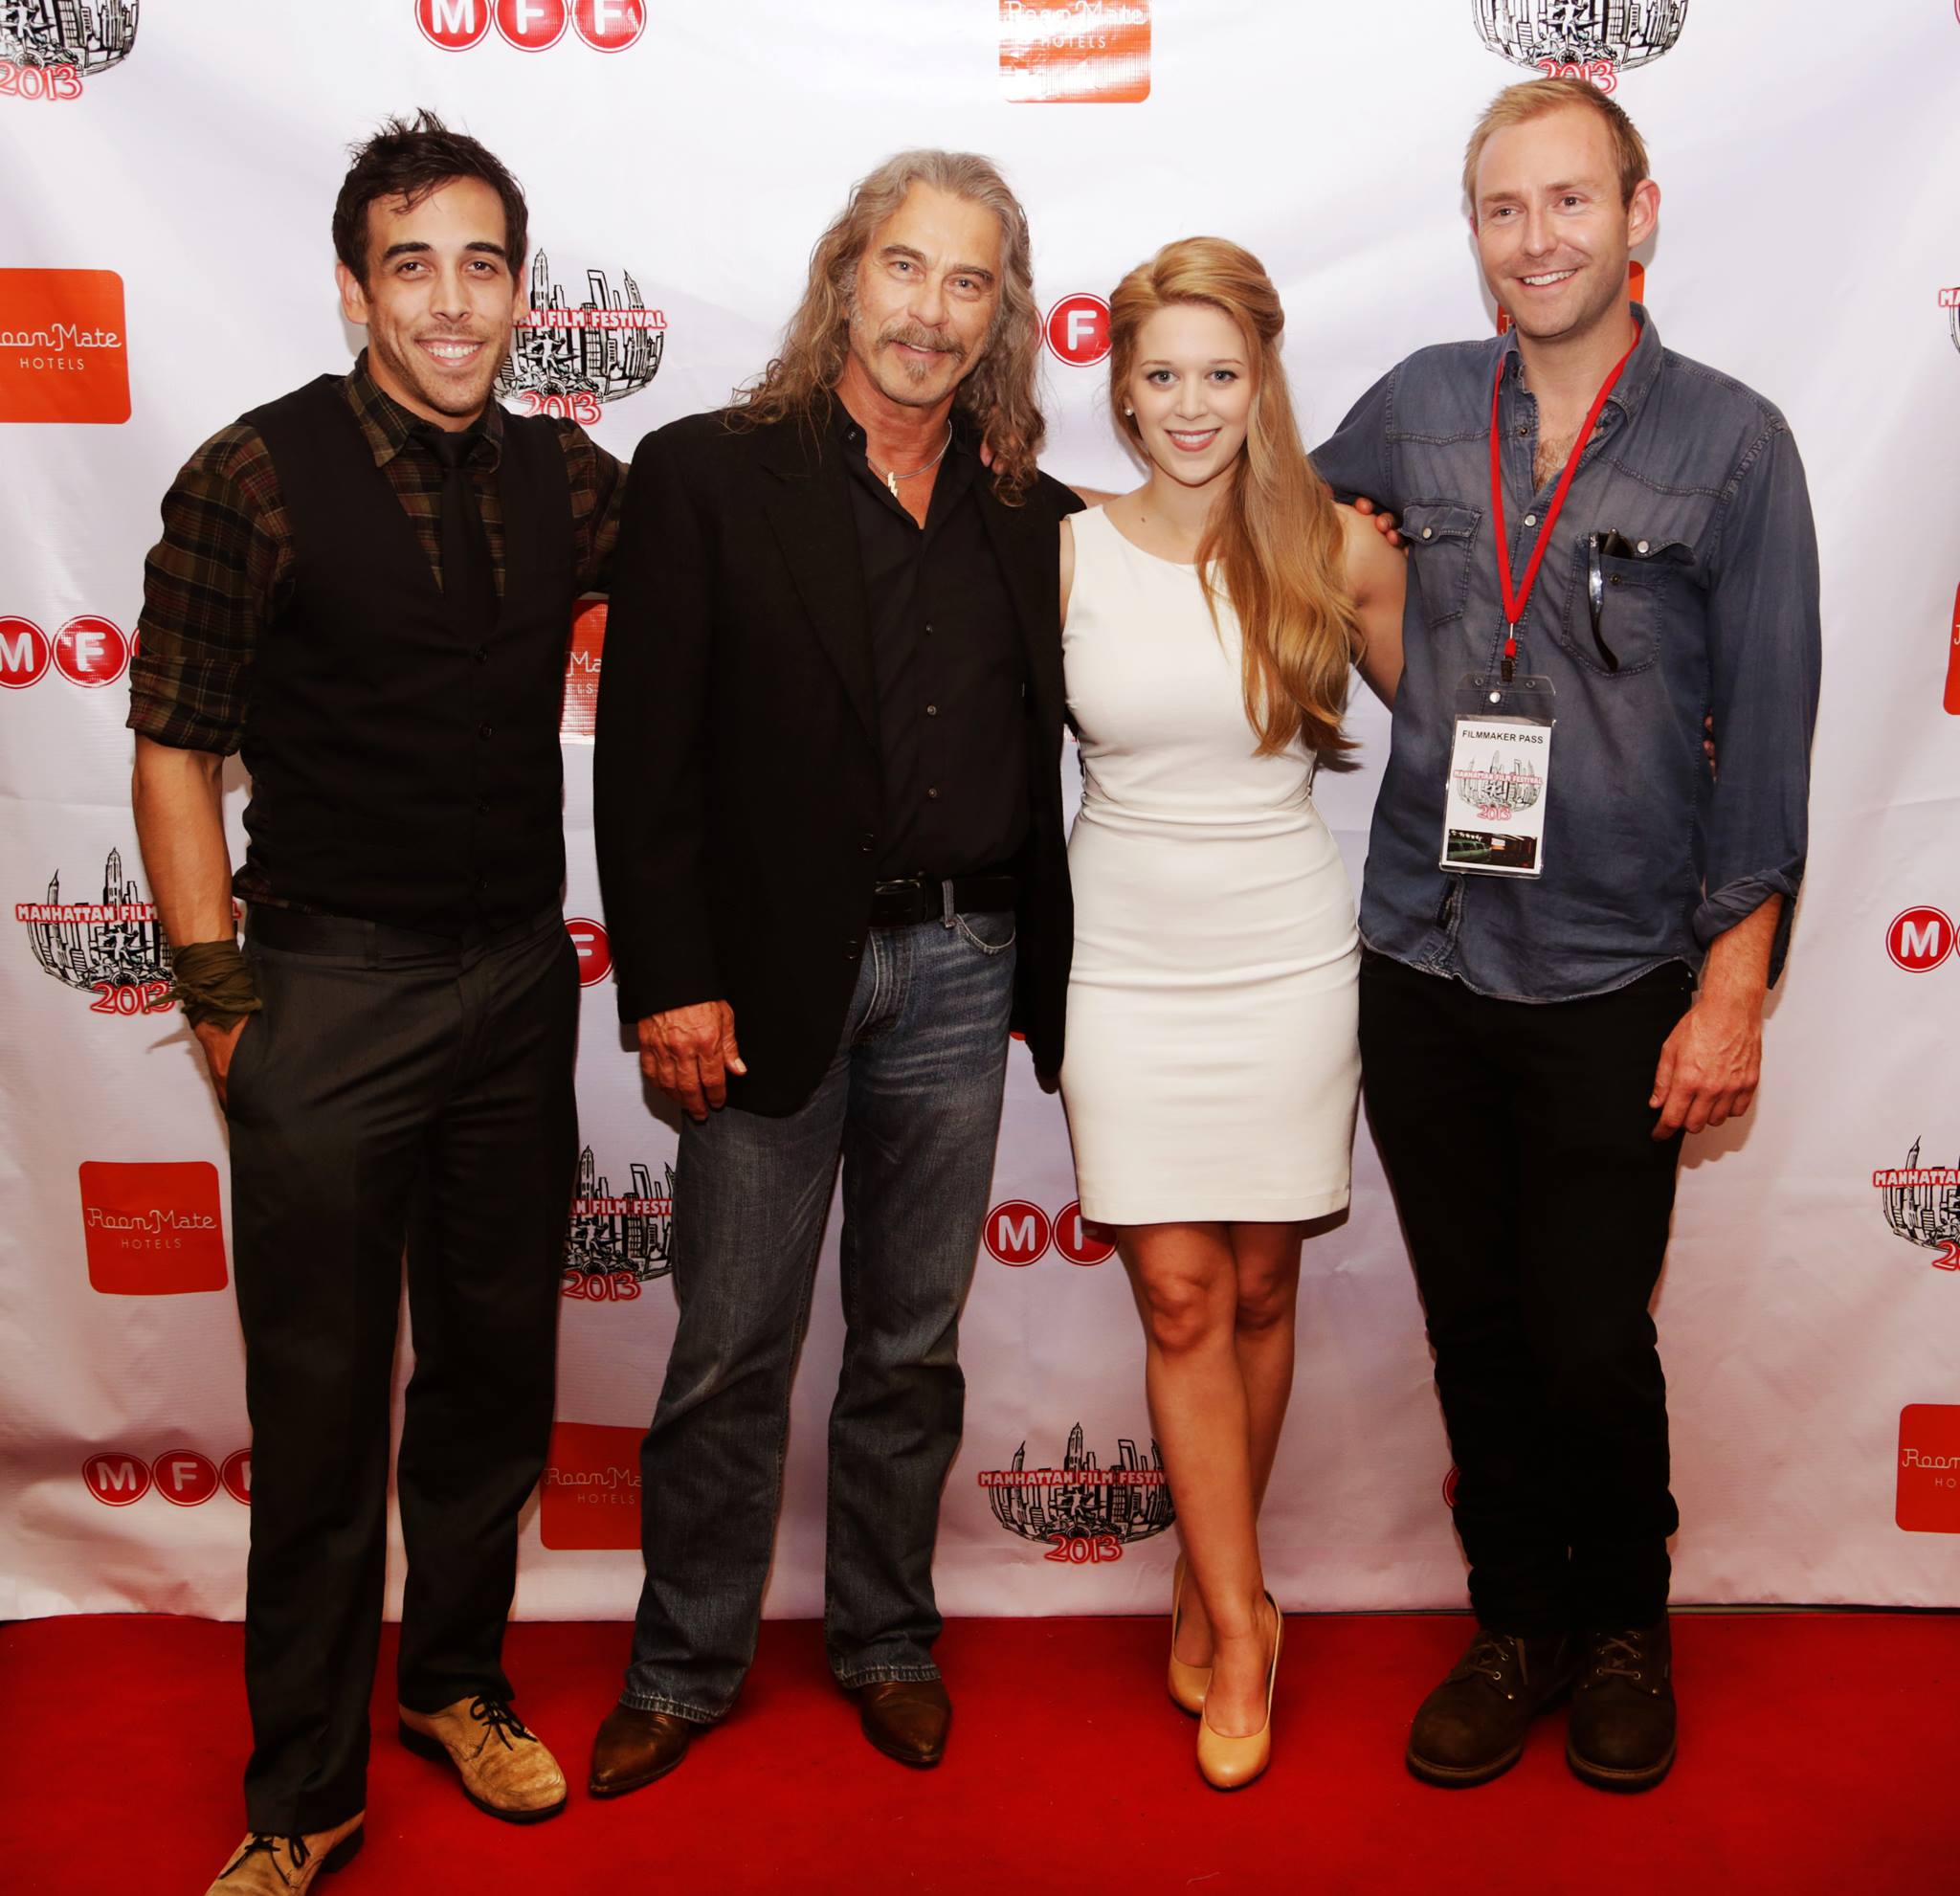 Clayton on the red carpet at the Manhattan Film Festival 2013 with the fellow cast members of The Guide